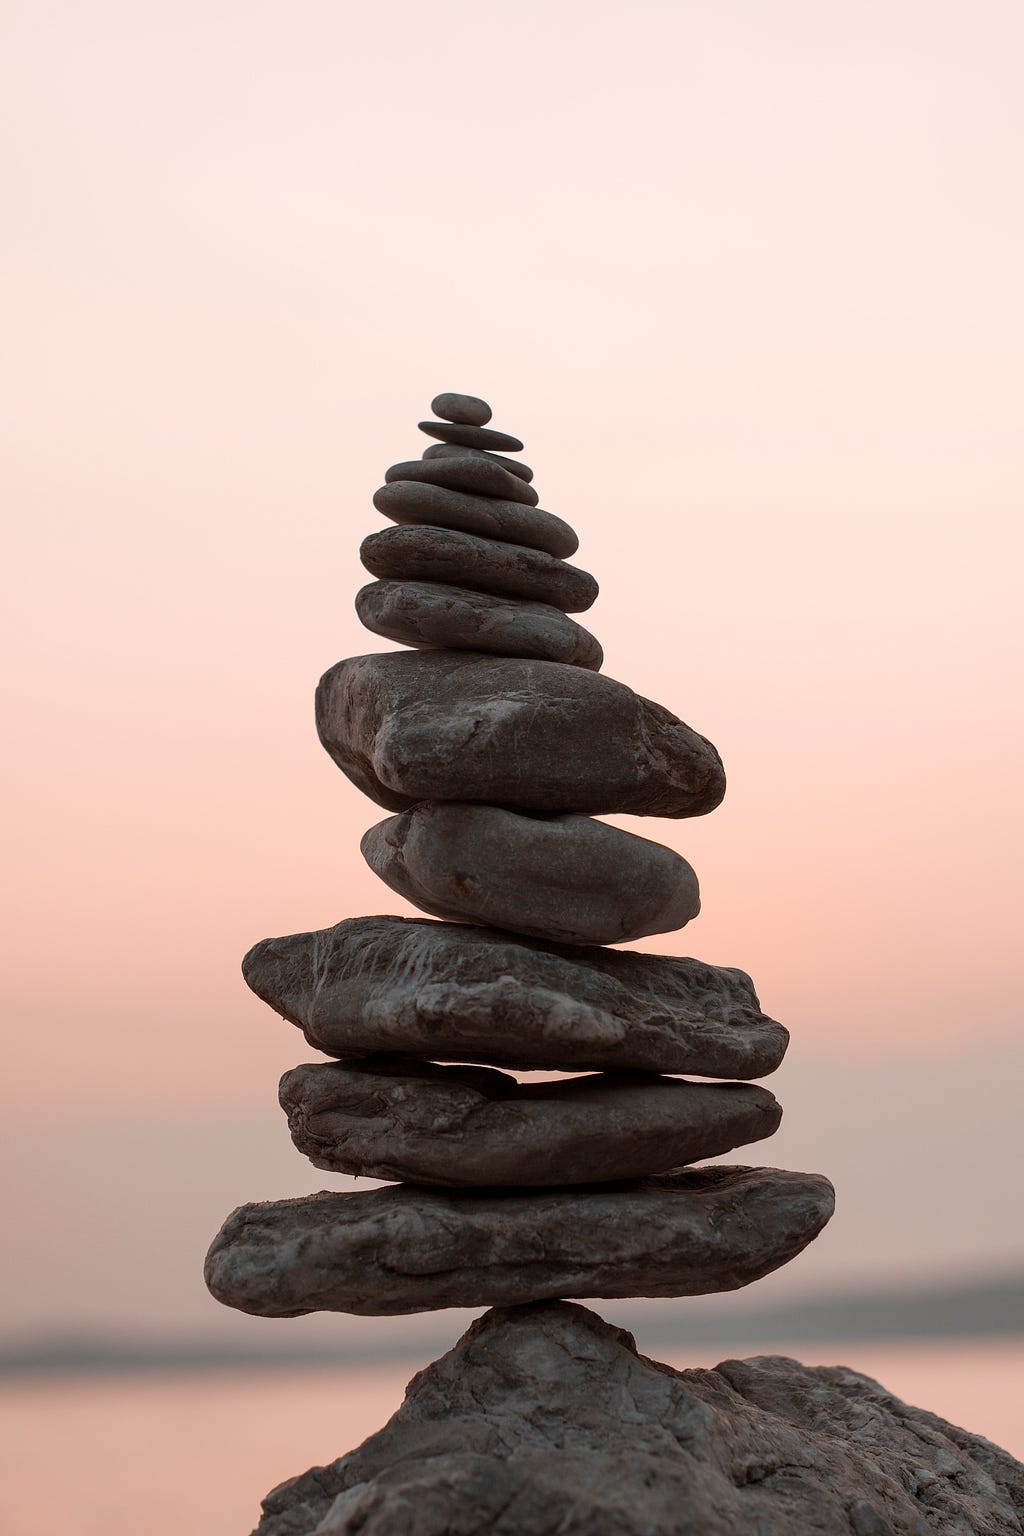 A pile of perfectly balanced rocks stands against the sky.